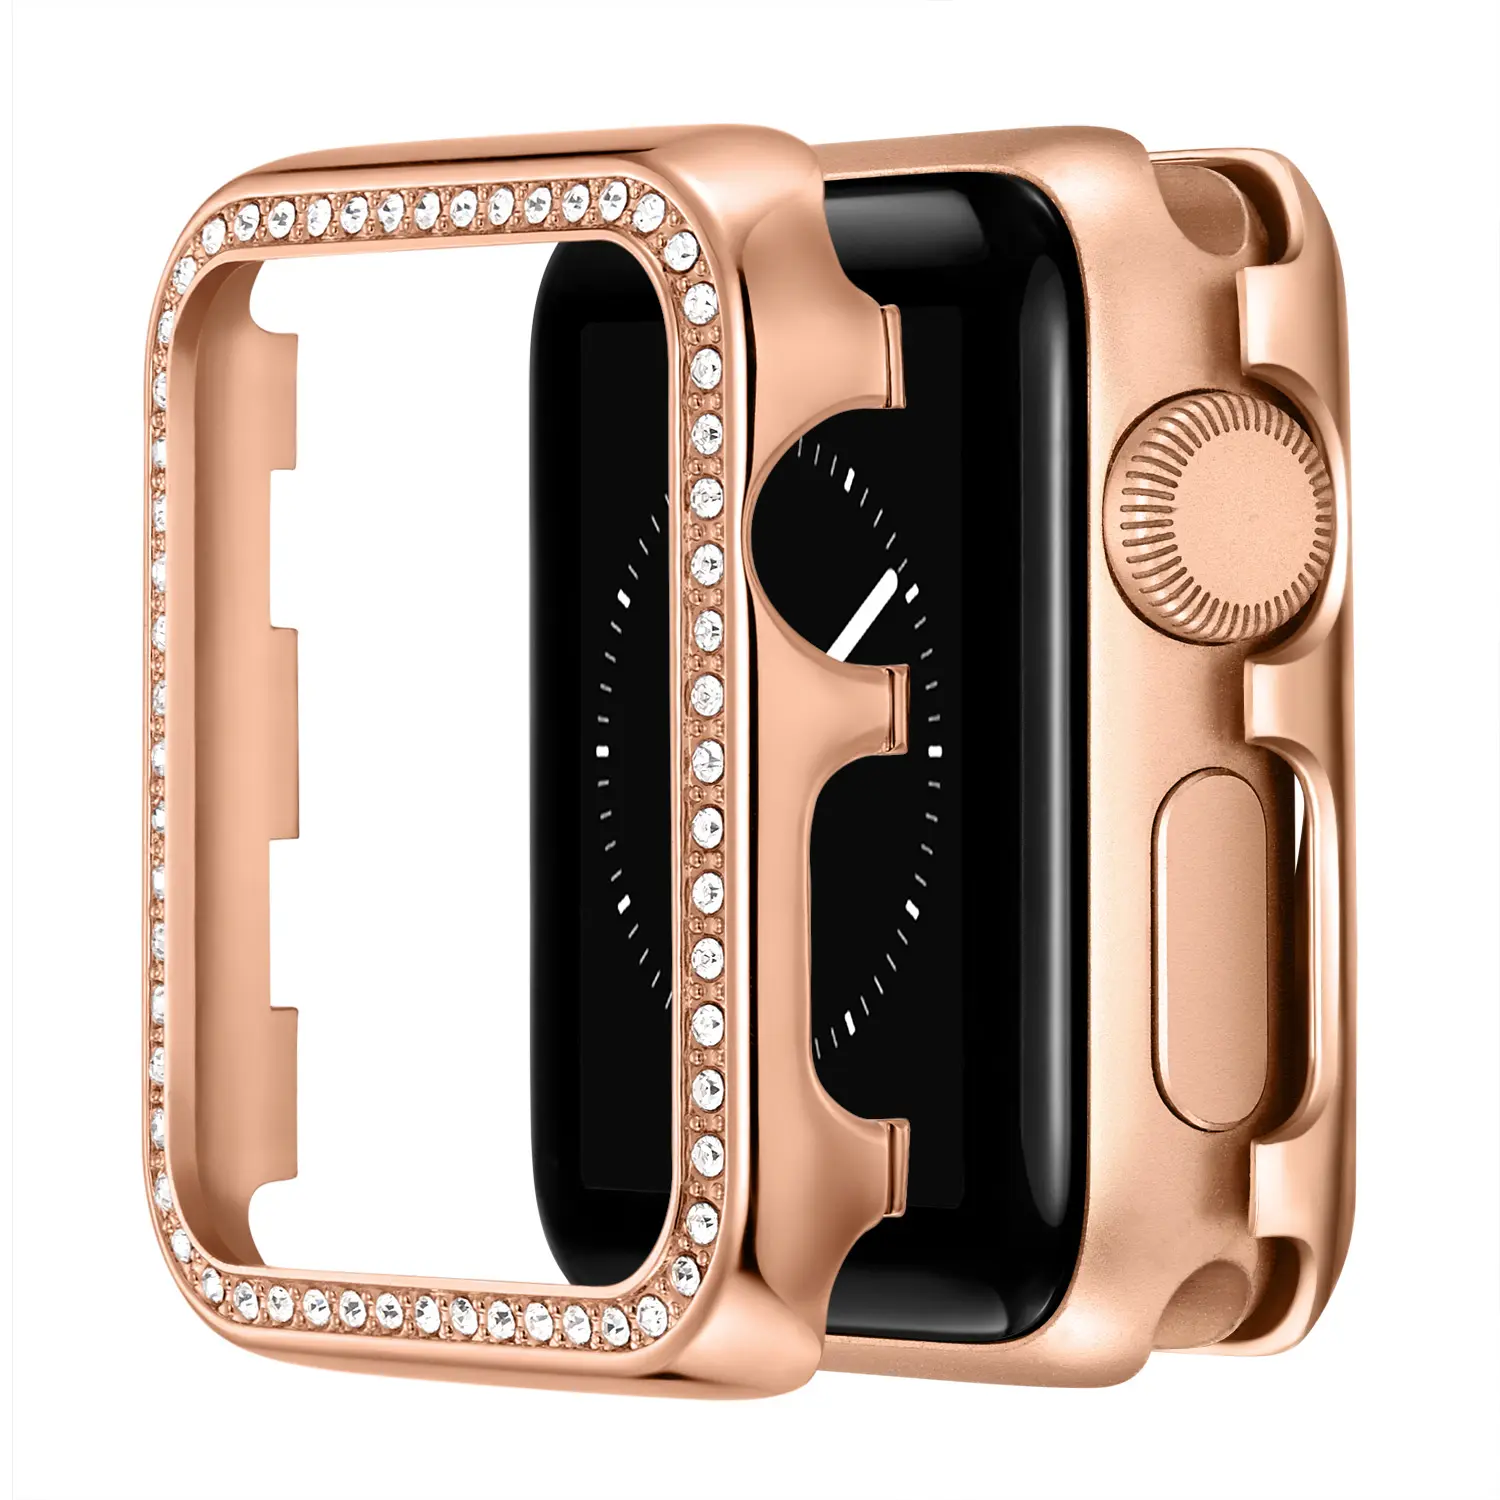 2021 RX Luxury Zinc Alloy Screen Protector Watch Case with Zircon for Apple Watch Cover Bling Diamond Smart Watch Case